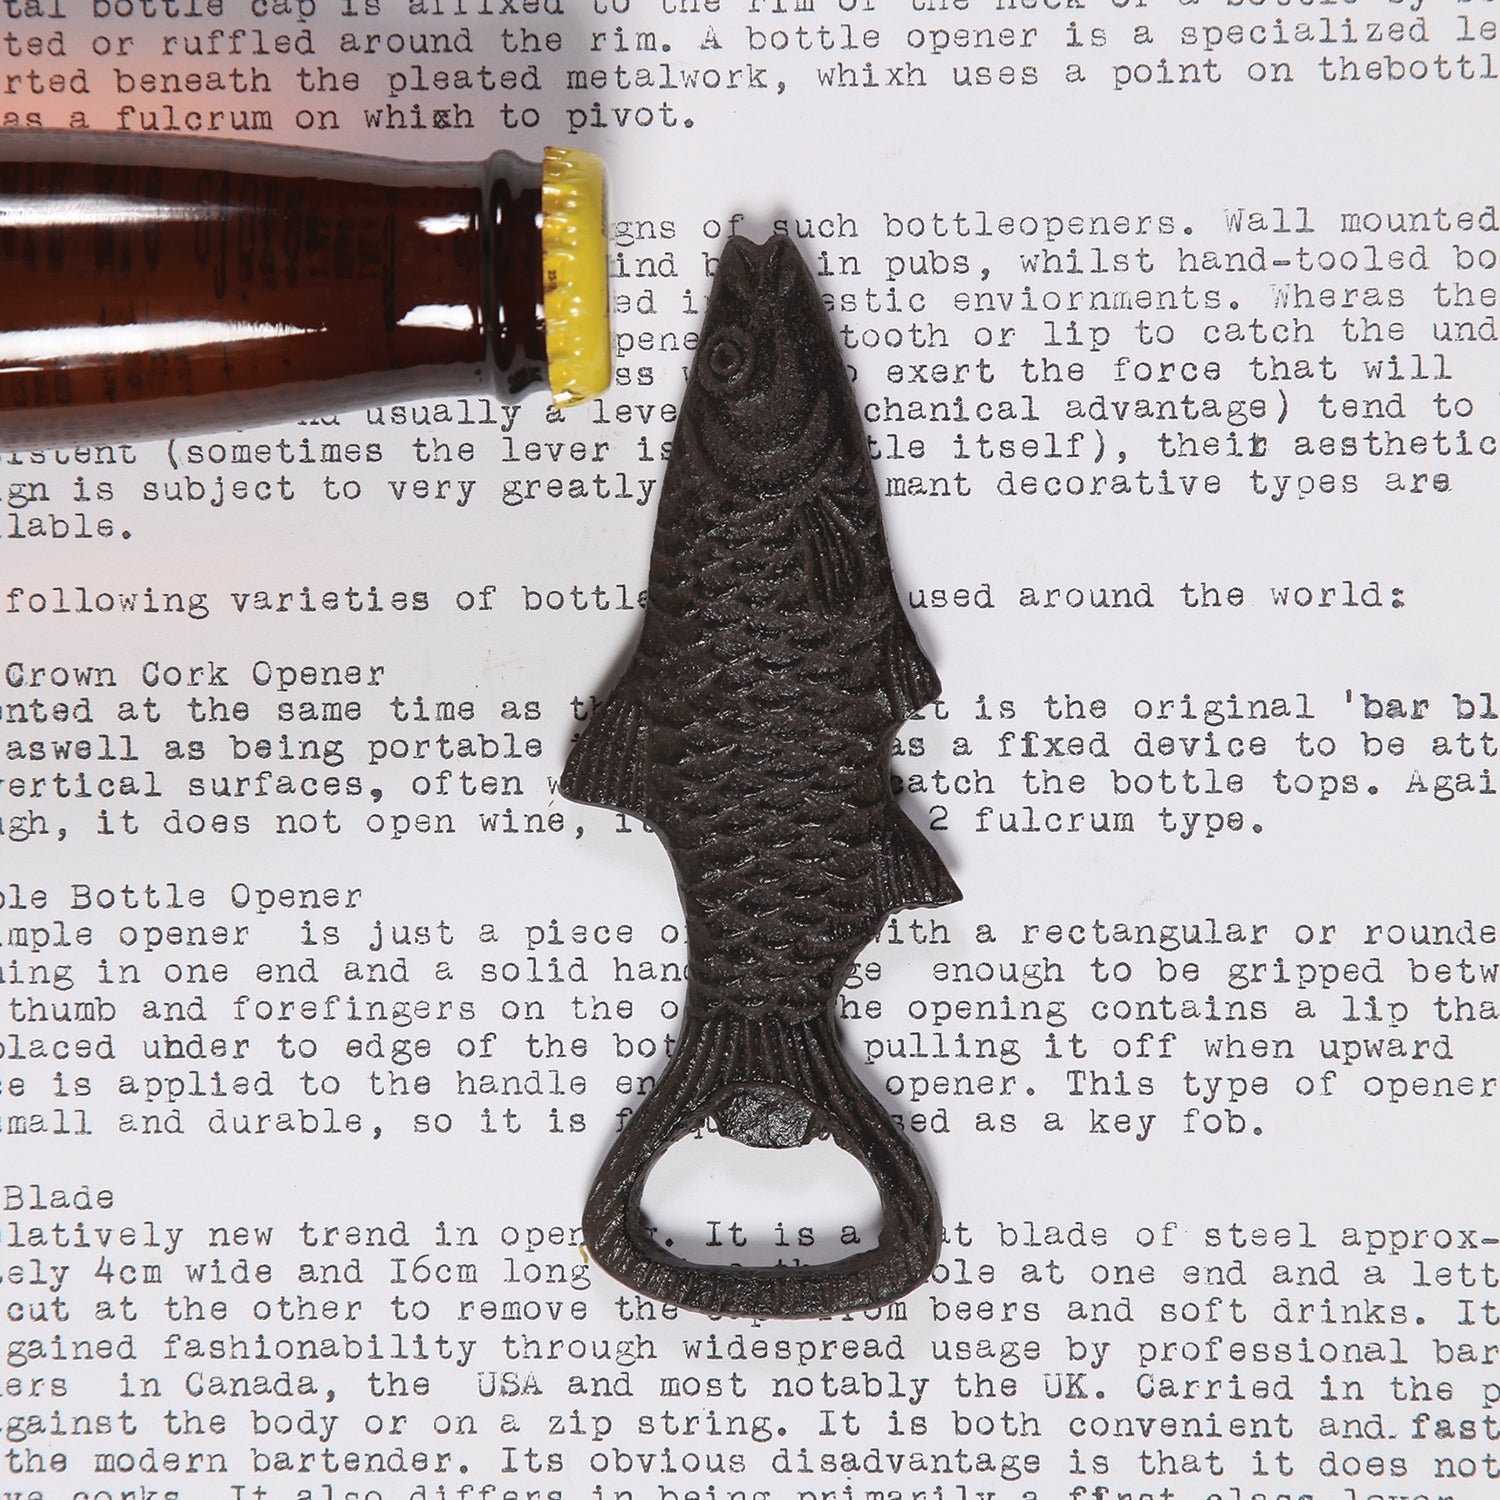 Image of a cast iron fish bottle opener next to a beer bottle.